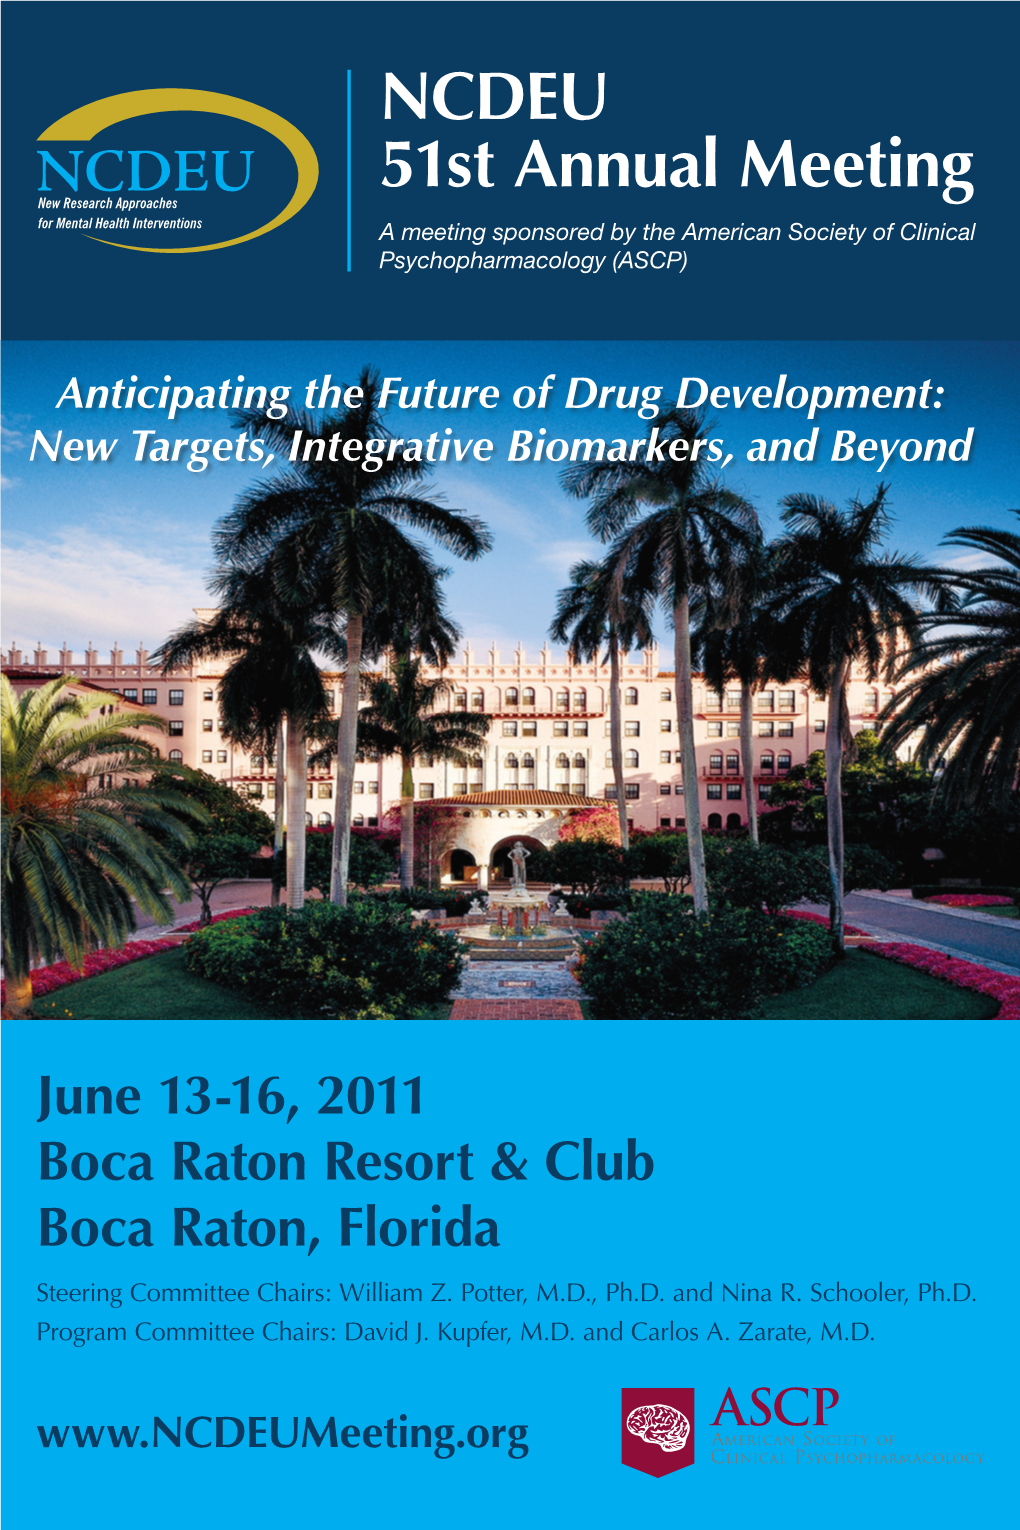 NCDEU 51St Annual Meeting a Meeting Sponsored by the American Society of Clinical Psychopharmacology (ASCP)